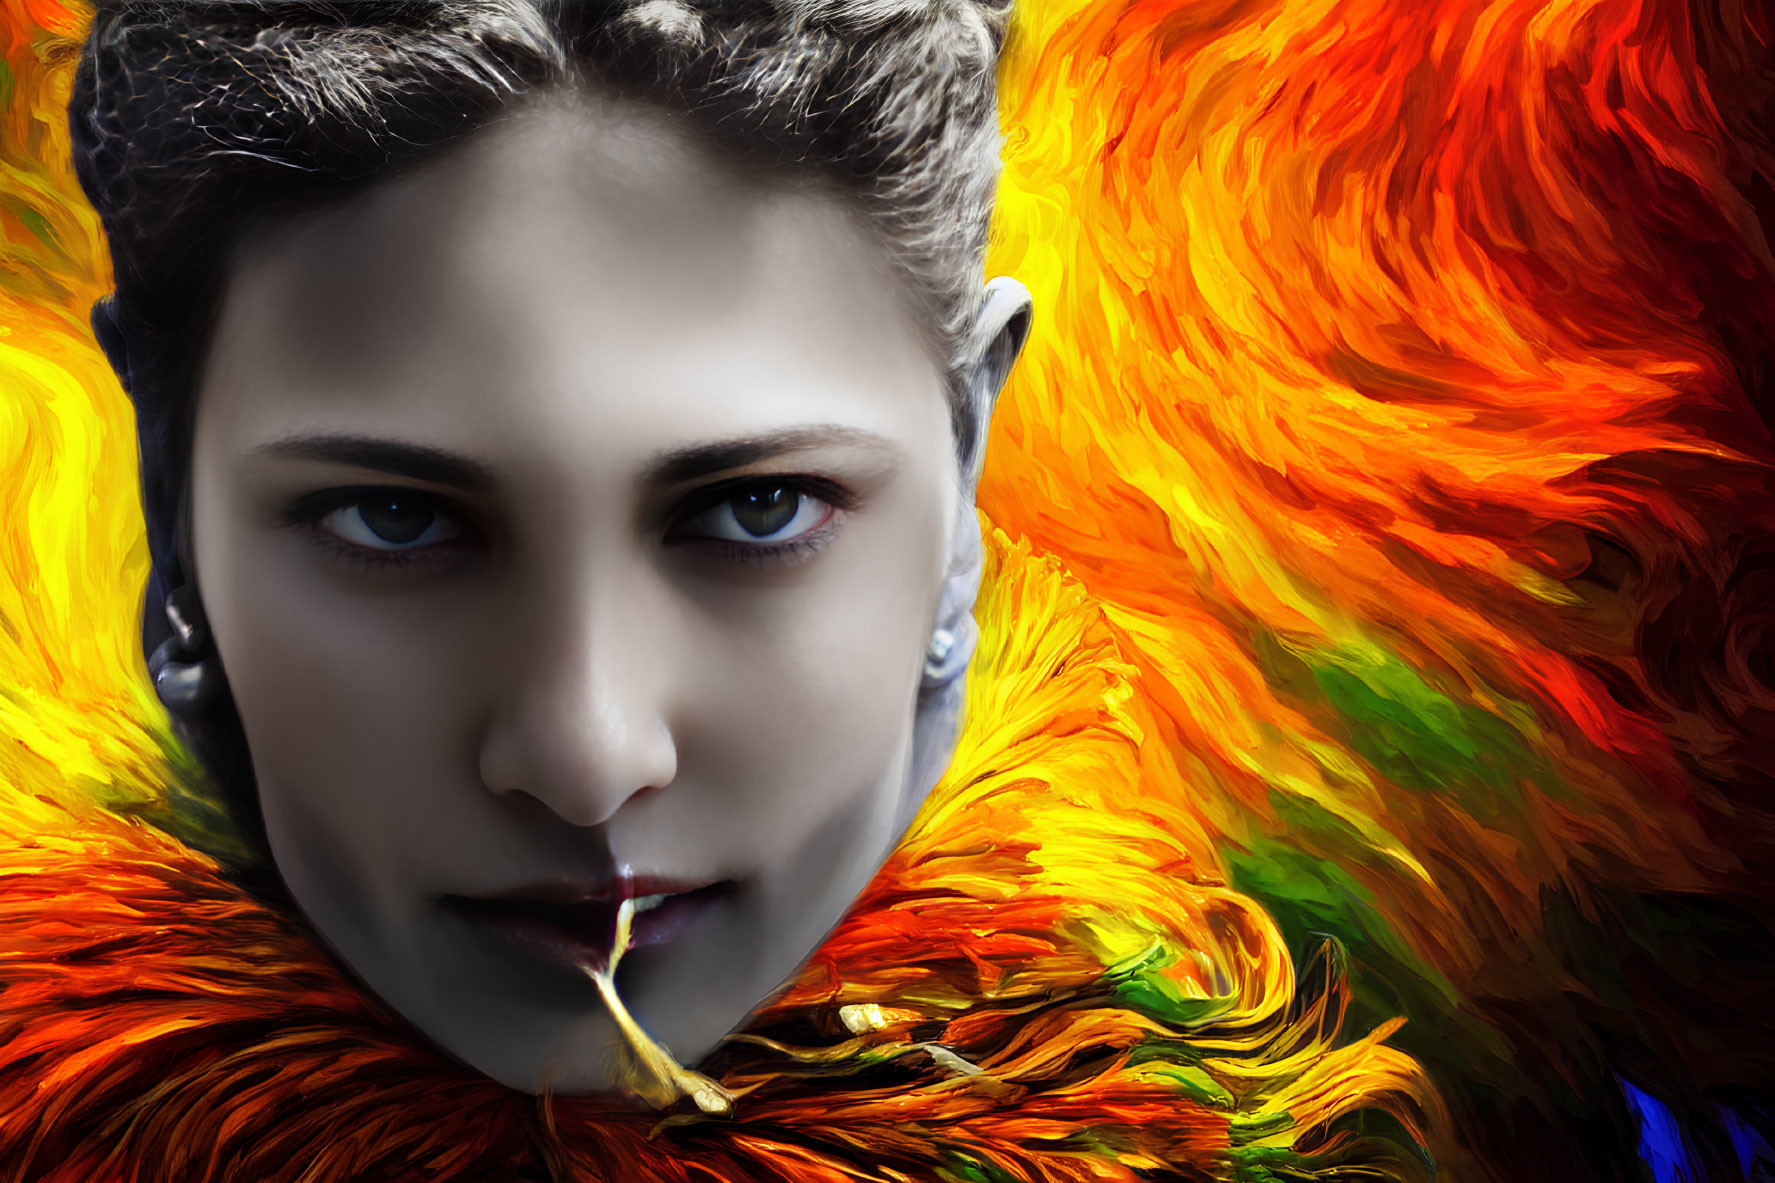 Face in vibrant fire-like burst with intense eyes and feather.